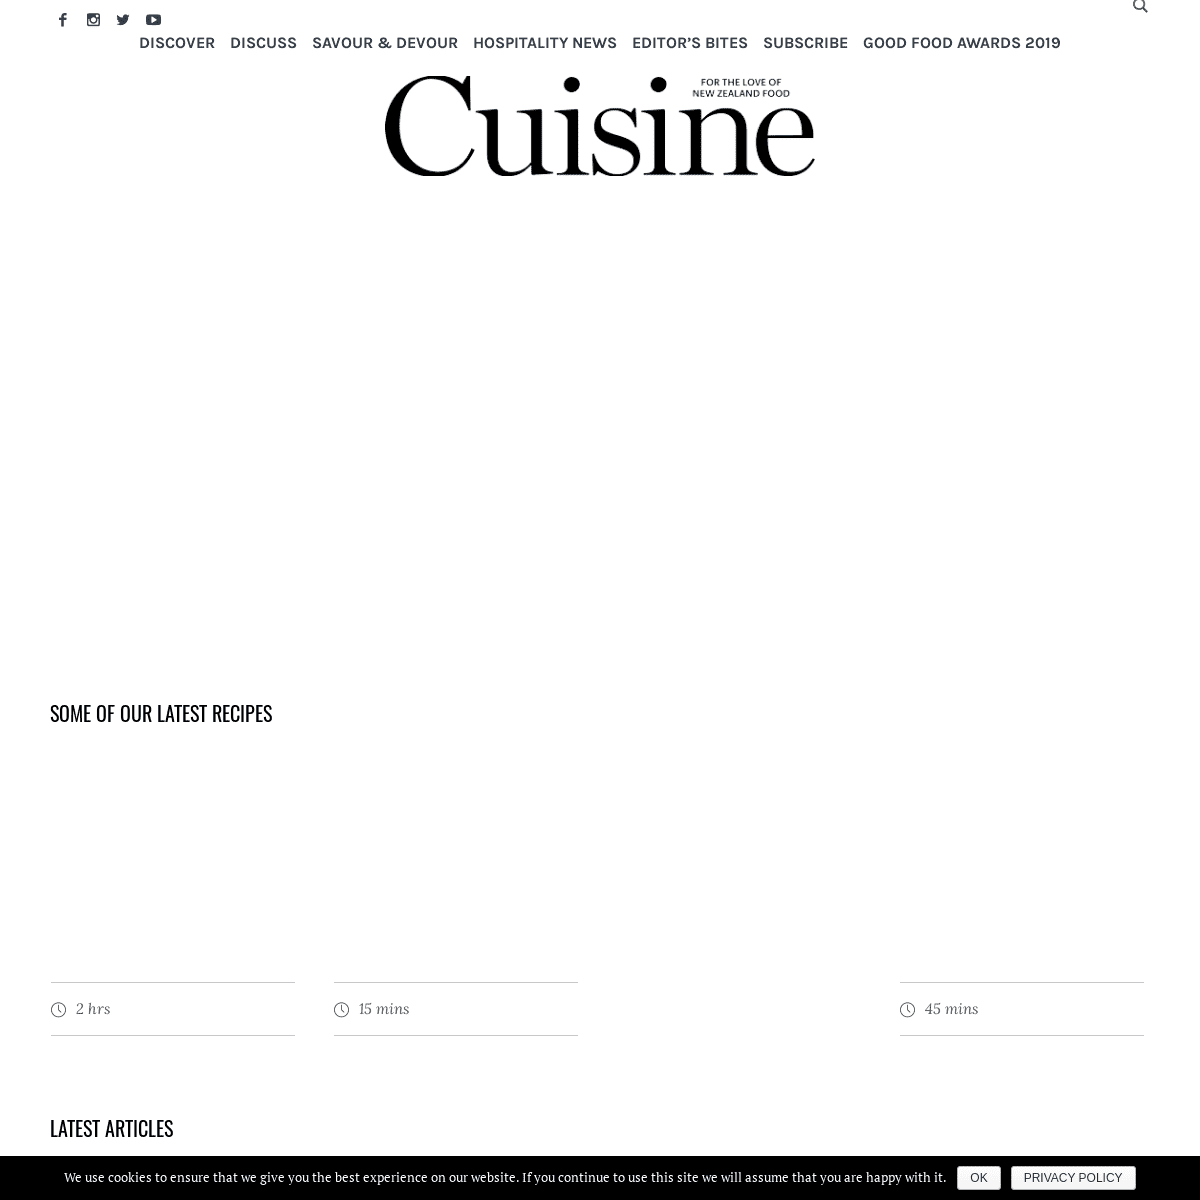 A complete backup of https://cuisine.co.nz